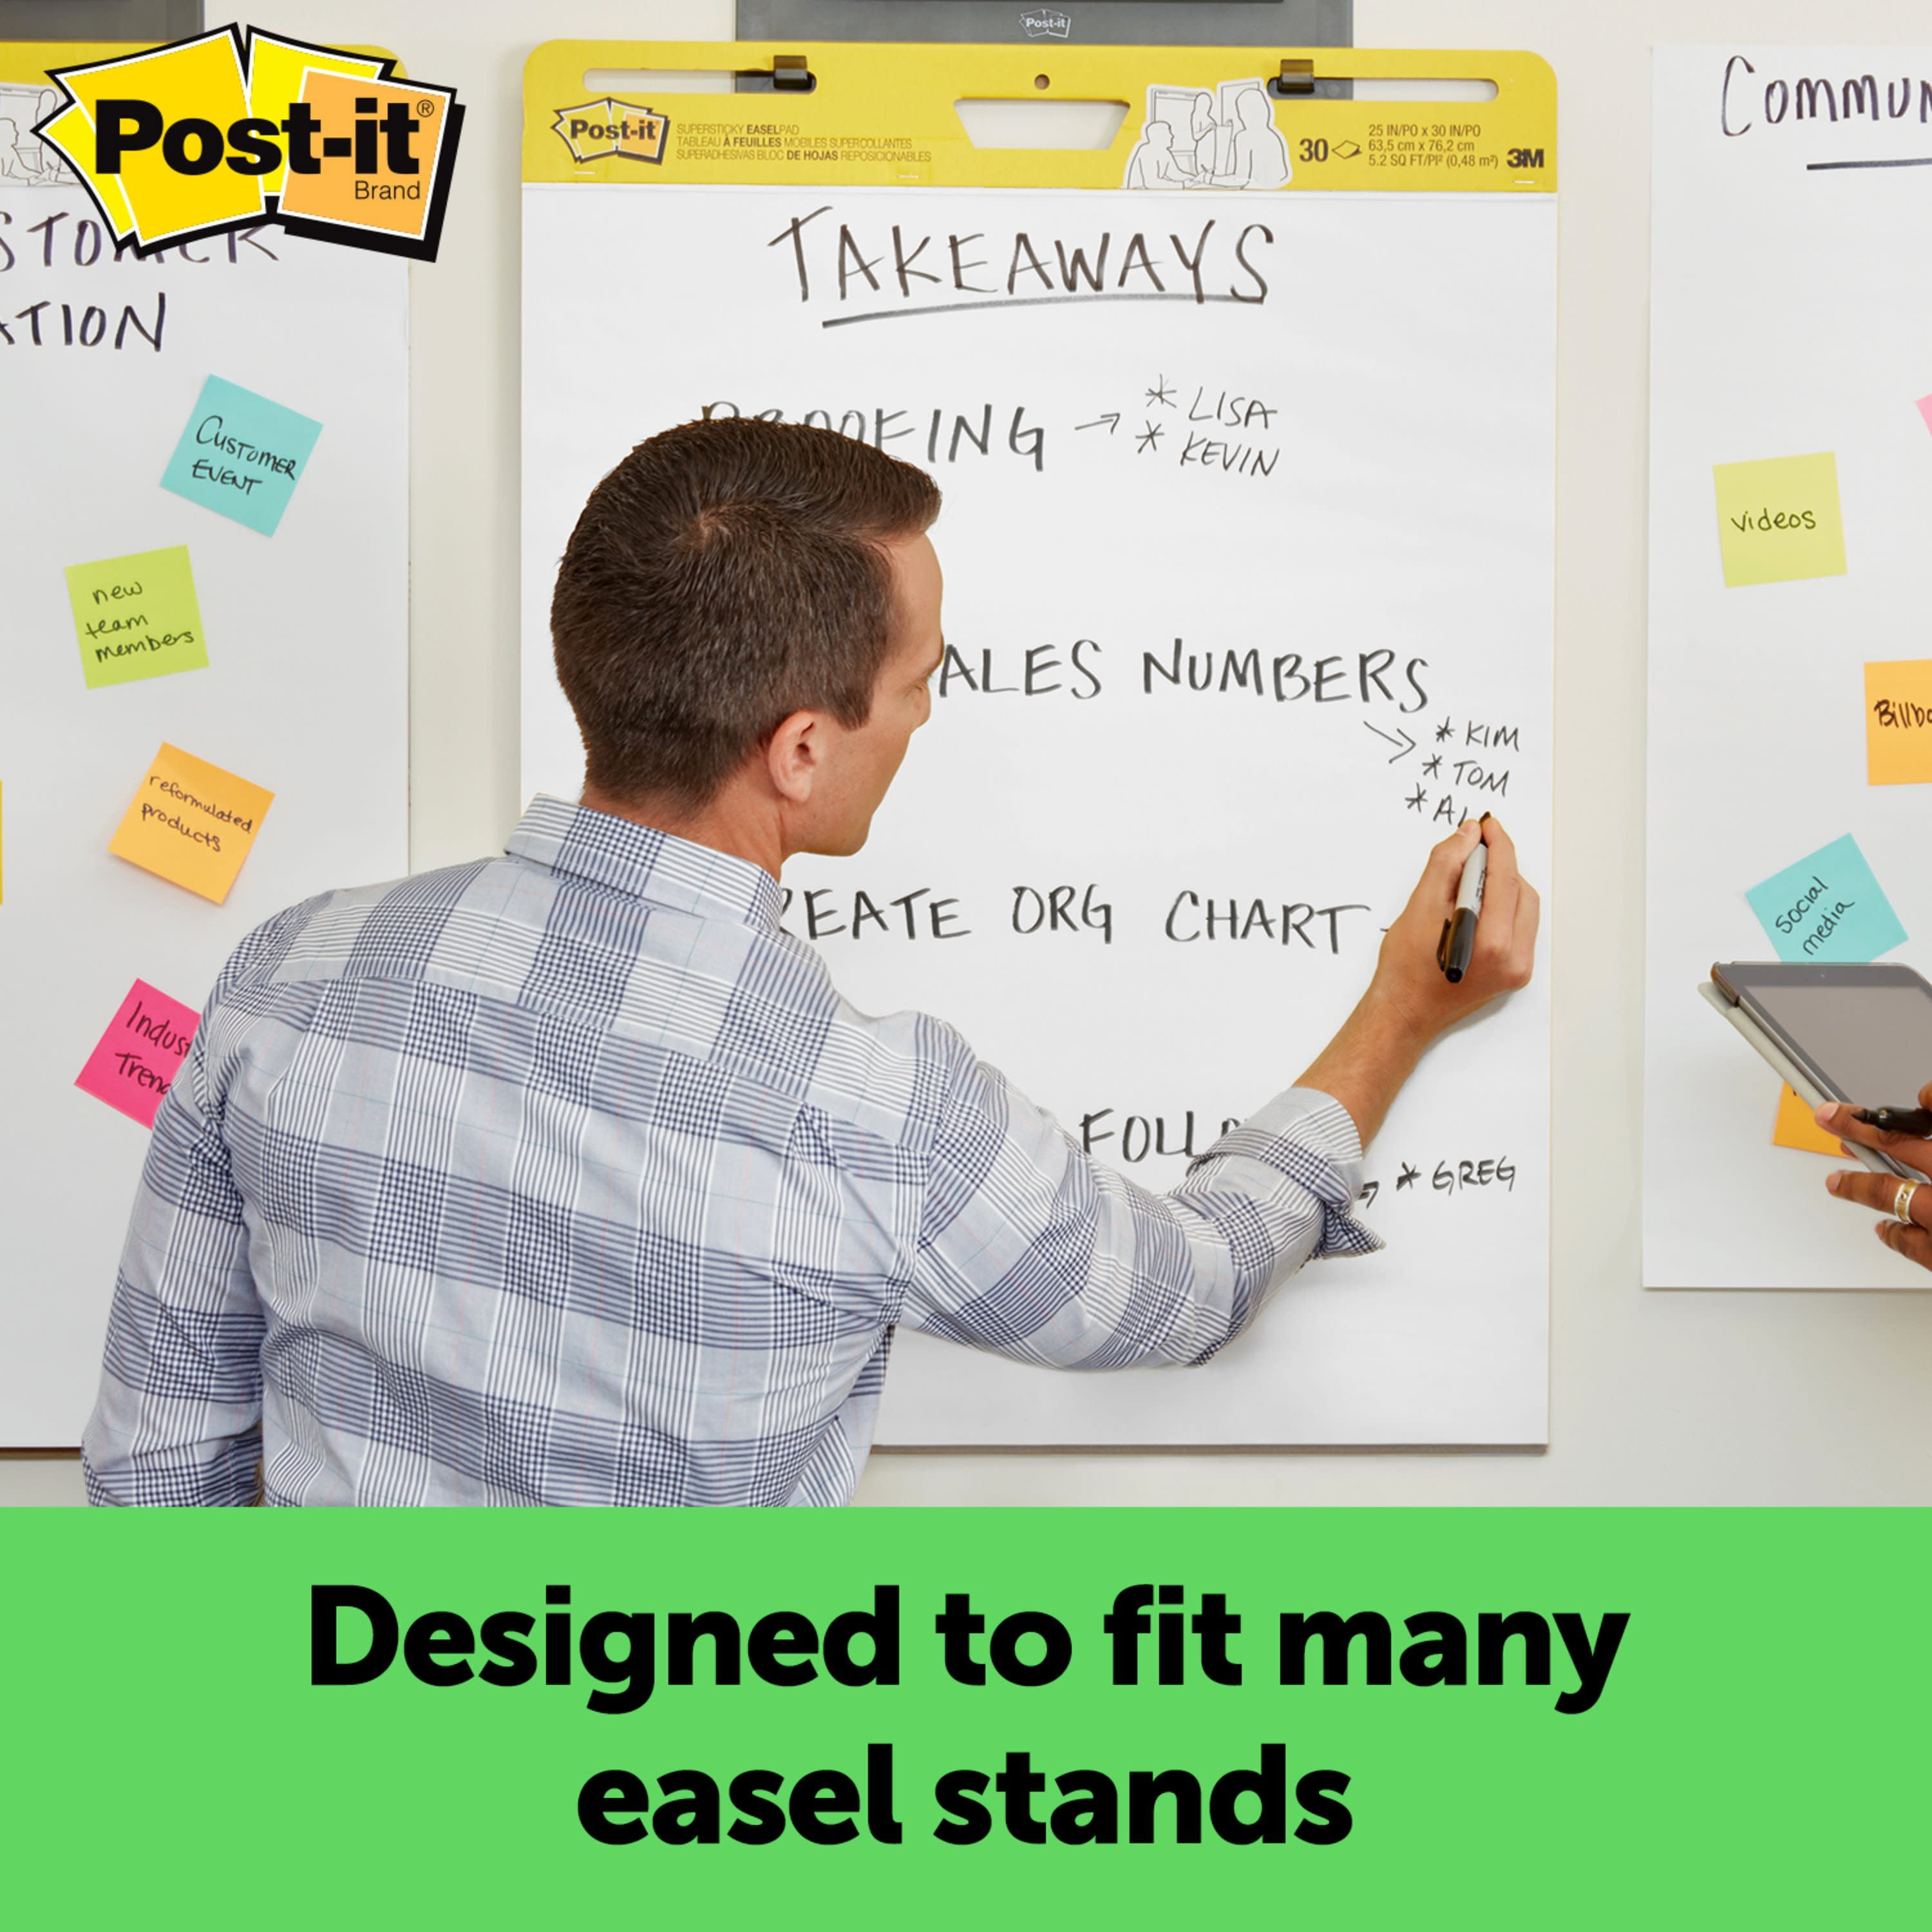 Buy Post-it 25 x 30 White Self-Stick Easel Pad - 4 Pads (MMM559VAD)